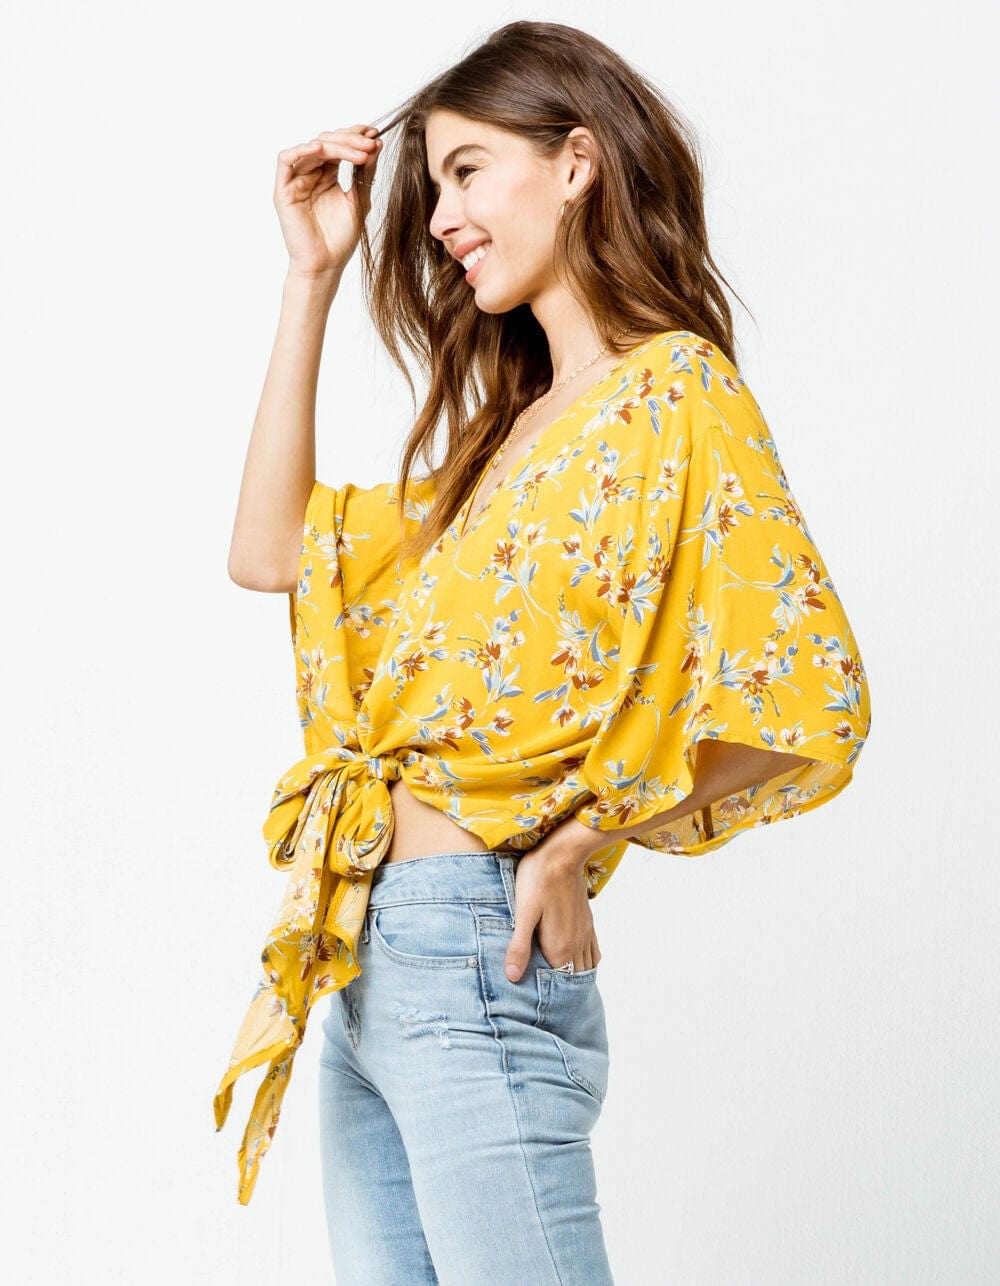 POLLY & ESTHER Womens Tops S / Mustard / C01 POLLY & ESTHER - Juniors' Printed Tie Front Dolman Sleeved Top